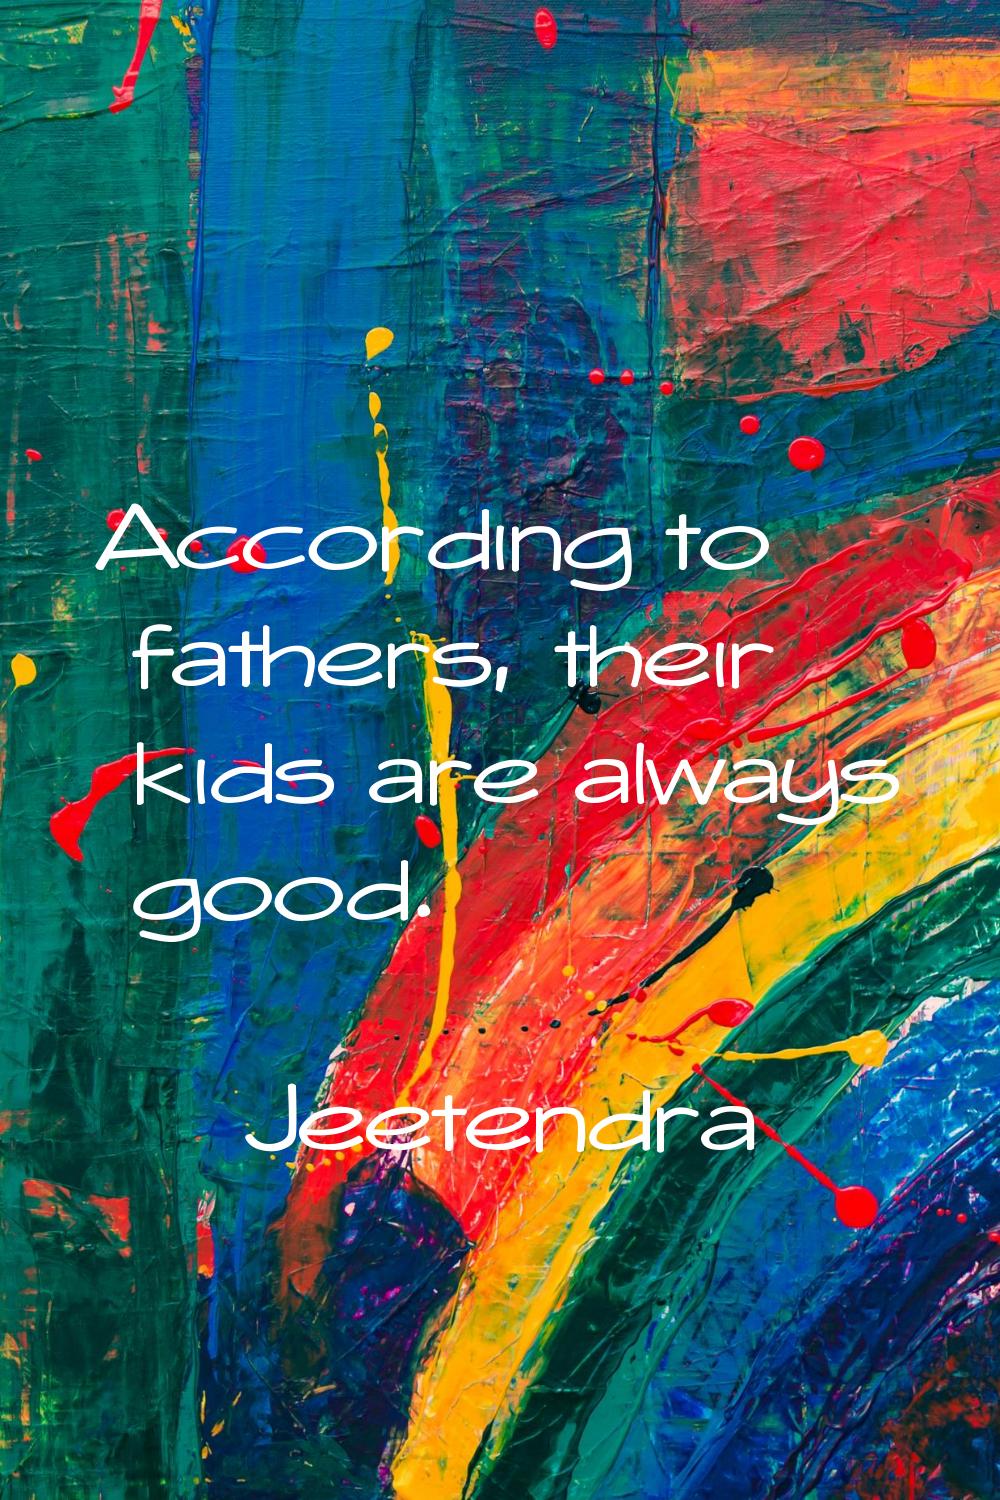 According to fathers, their kids are always good.